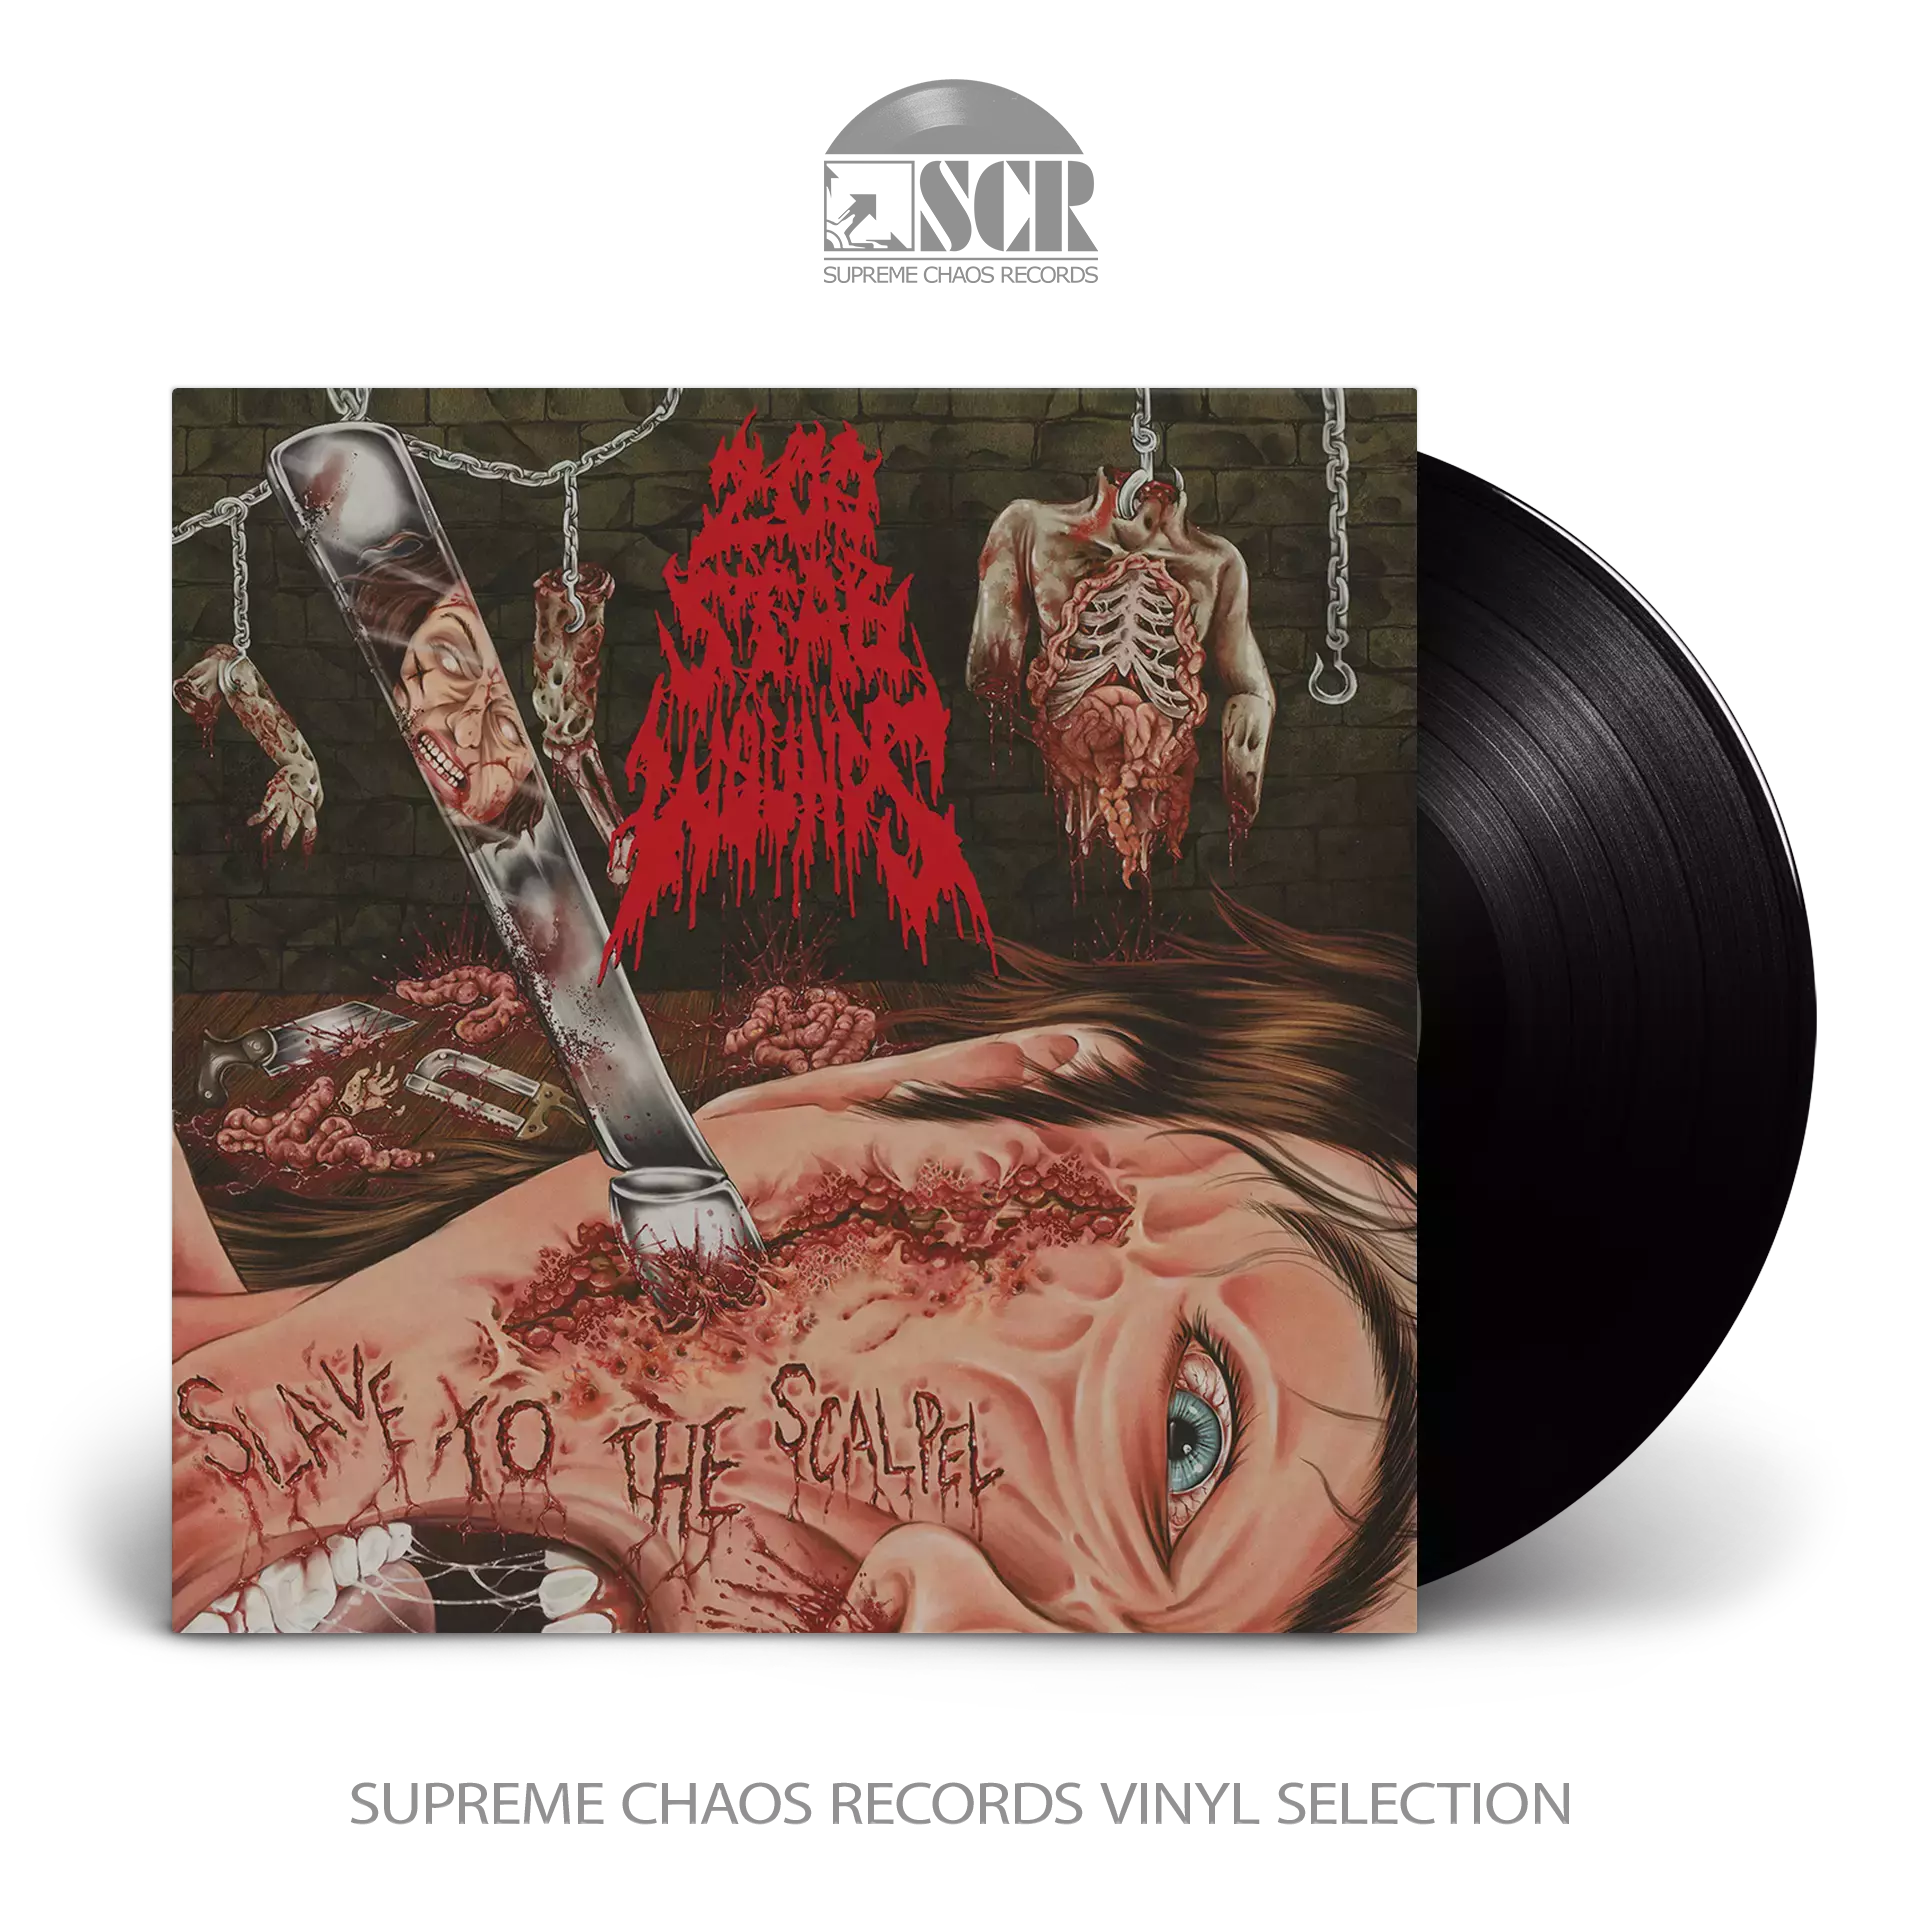 200 STAB WOUNDS - Slave To The Scalpel (Re-Issue) [BLACK LP]